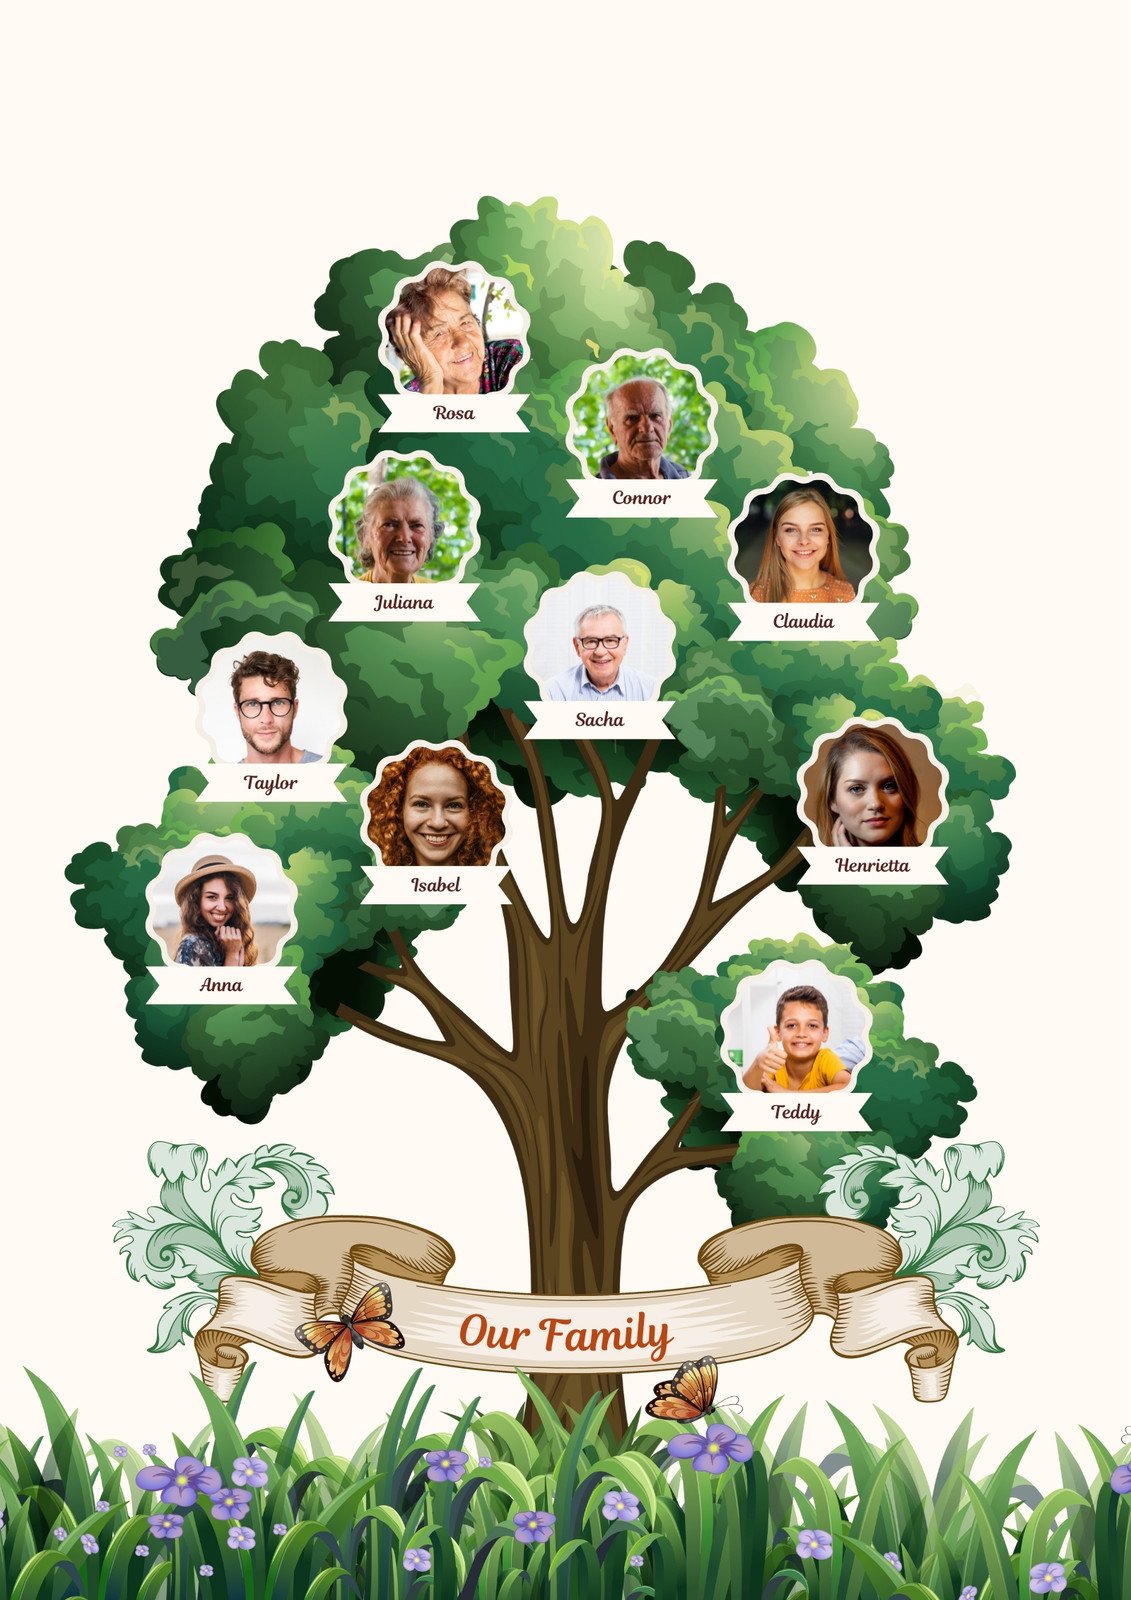 Free and customizable family tree poster templates